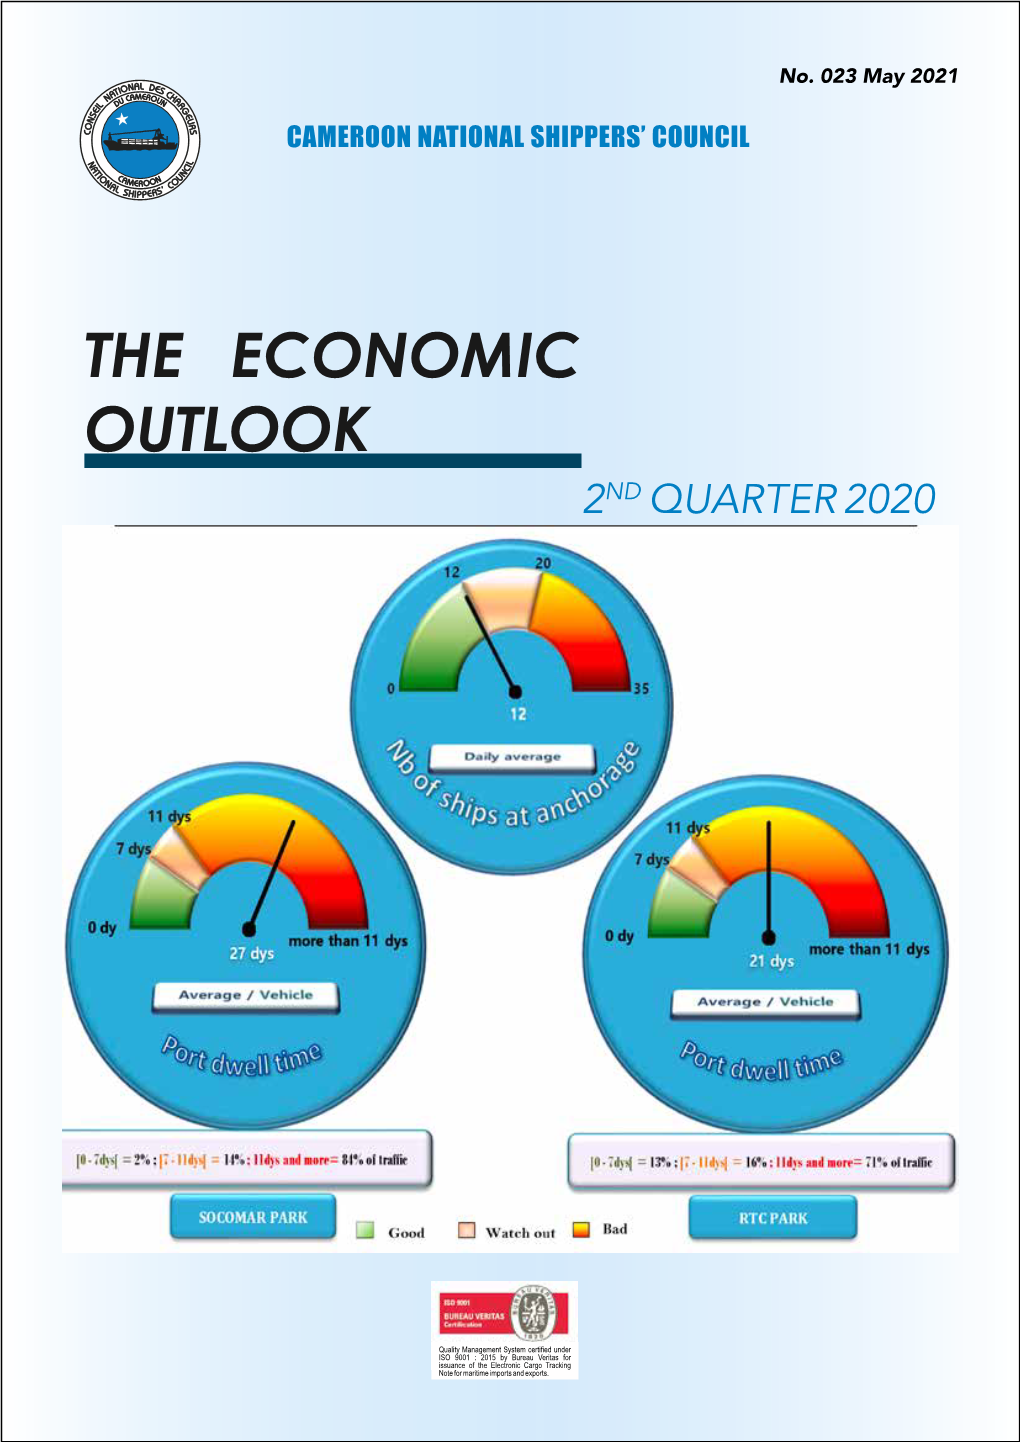 THE ECONOMIC OUTLOOK 2ND QUARTER 2020 the ECONOMIC OUTLOOK No